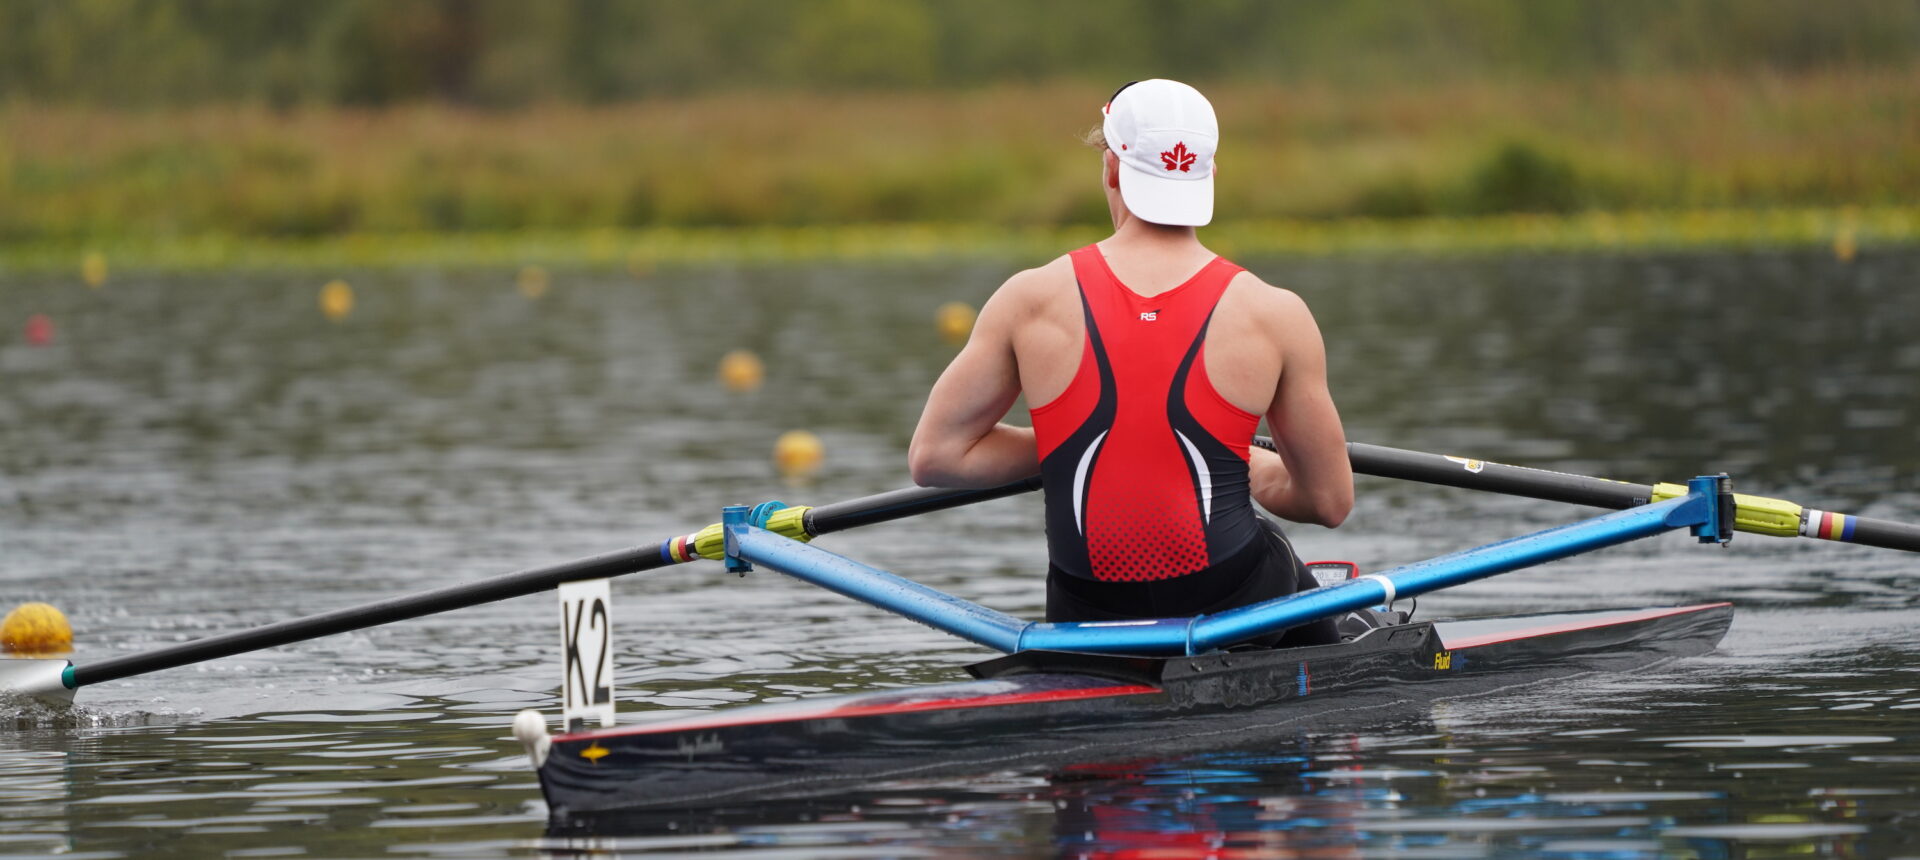 2020 National Rowing Championships and Canada Cup Cancelled